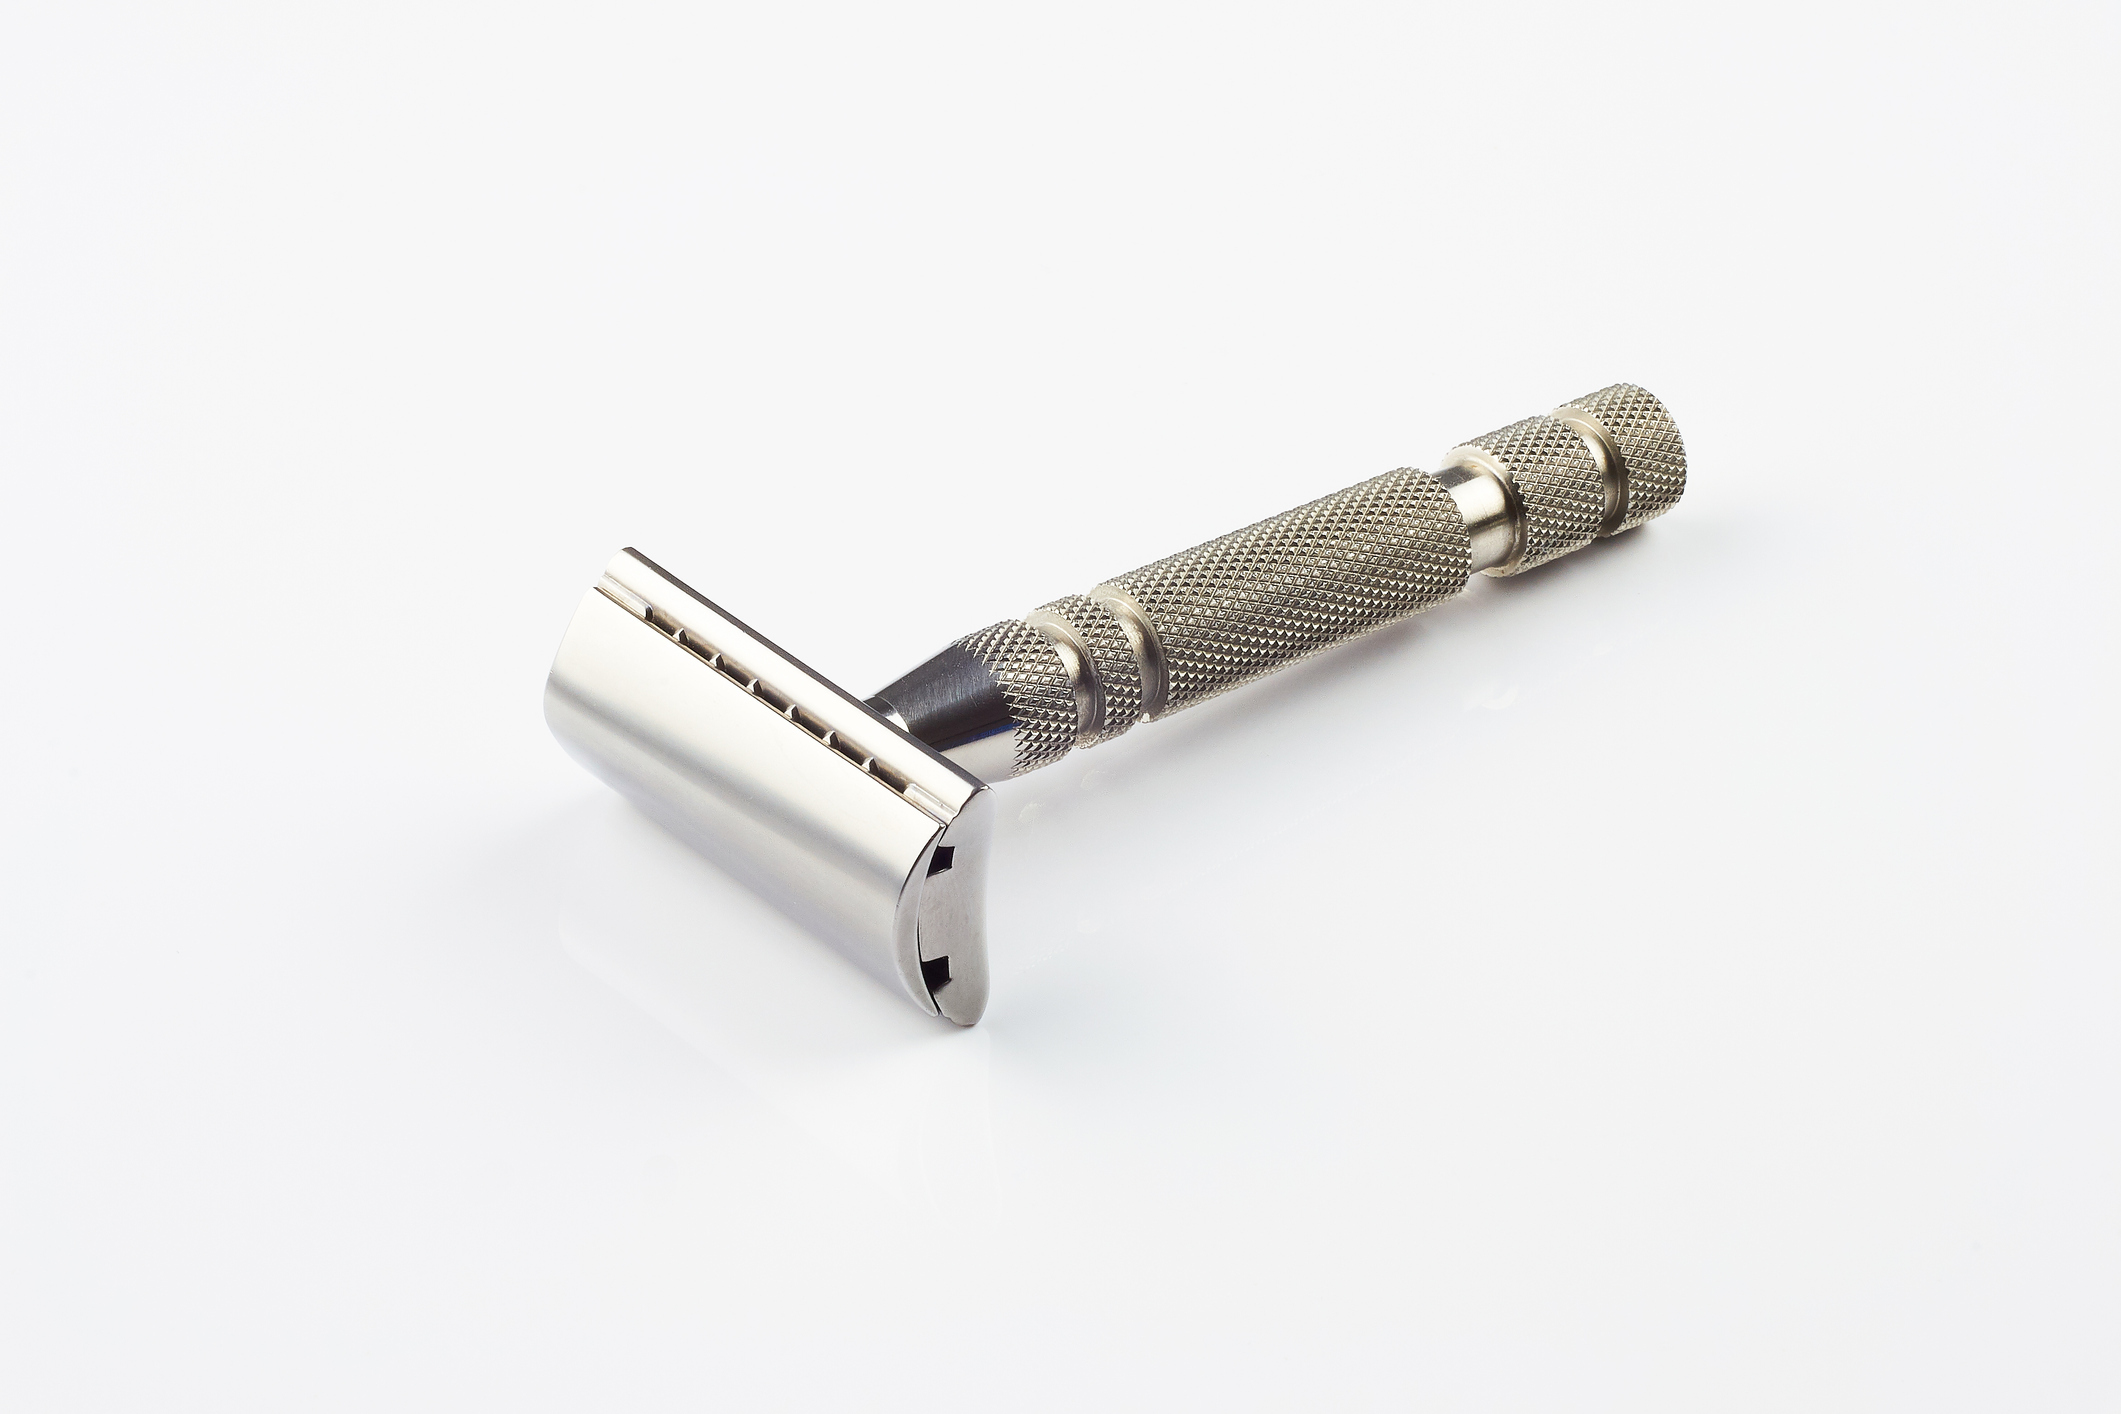 The classic stainless steel razor. Its still possible to buy them so that only the blade is disposed of